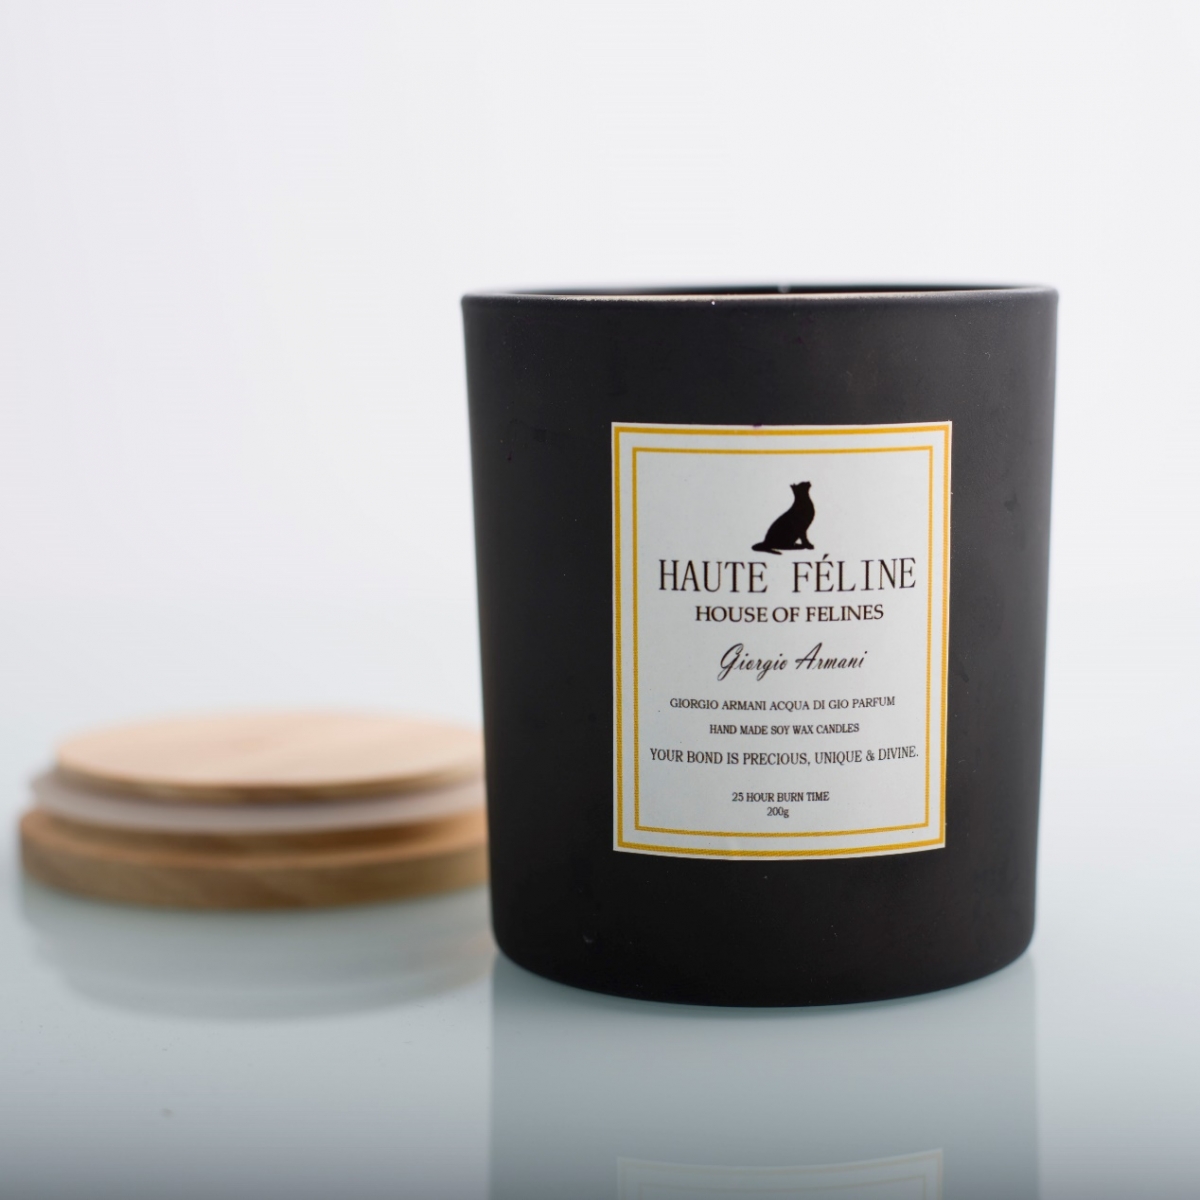 Vegan Candles -Creed Aventus ,Gold Foil Label ,Matte Black Candle Jar ,Wooden Wick ,Scented Candles ,China Factory ,Price-HOWCANDLE-Candles,Scented Candles,Aromatherapy Candles,Soy Candles,Vegan Candles,Jar Candles,Pillar Candles,Candle Gift Sets,Essential Oils,Reed Diffuser,Candle Holder,